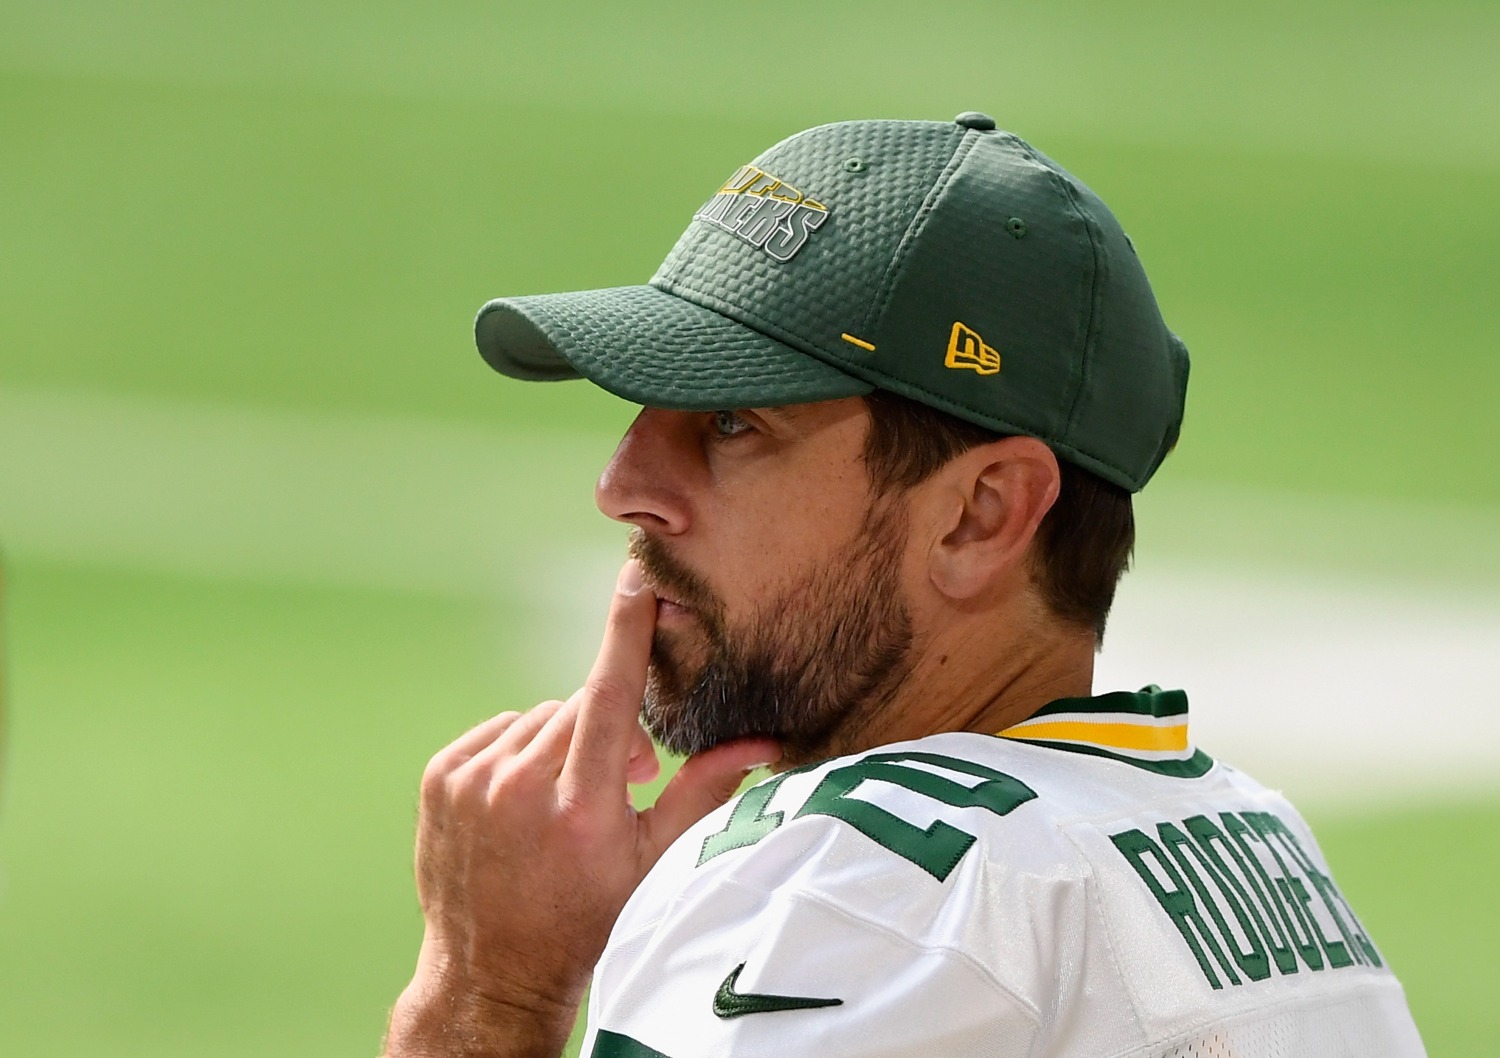 Aaron Rodgers just suffered a major blow to his MVP campaign with Packers WR Allen Lazard out indefinitely after undergoing surgery.